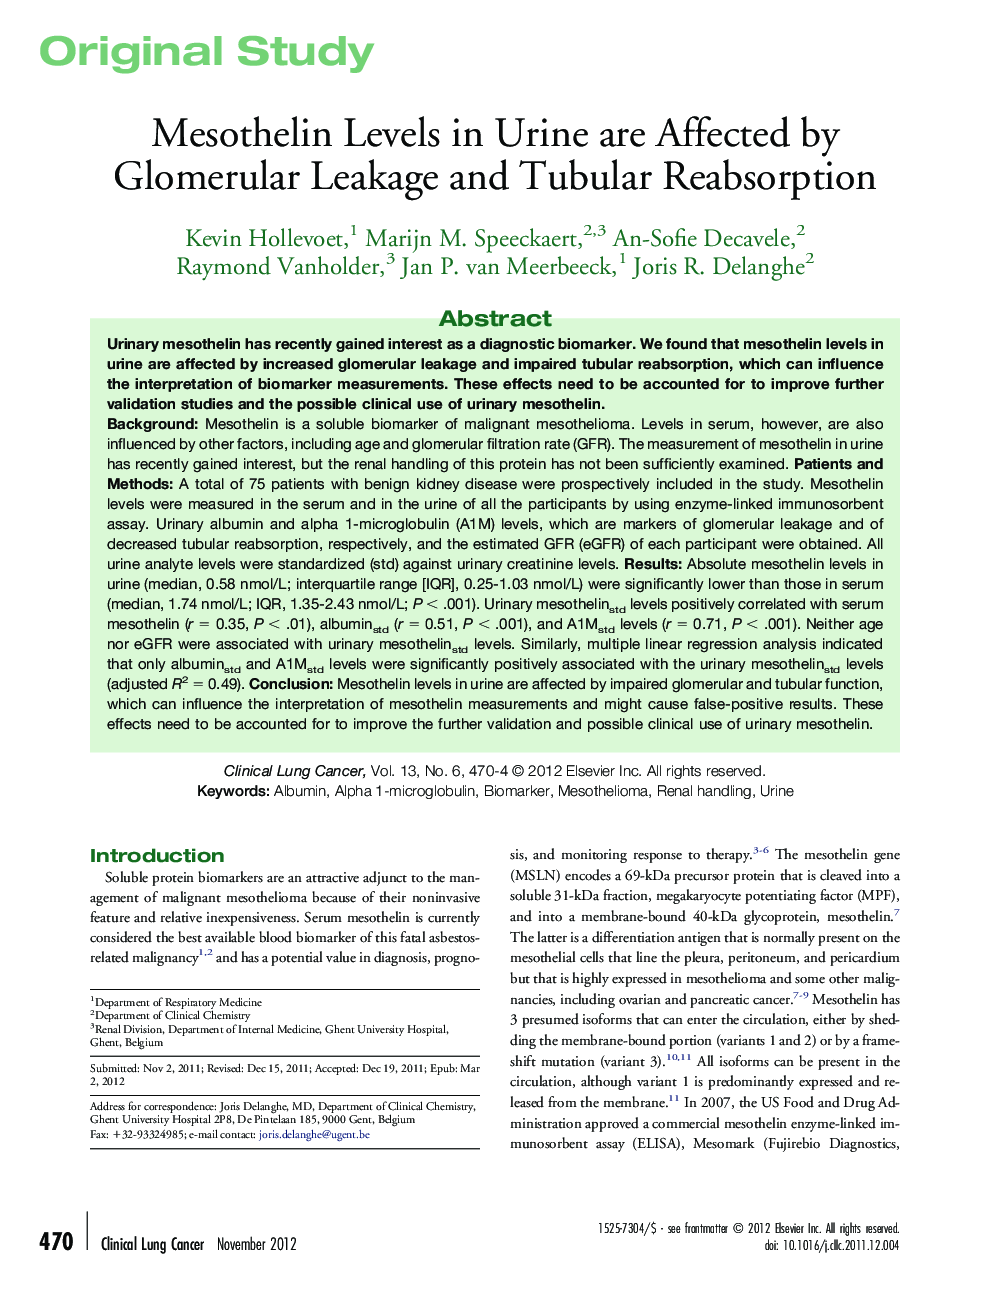 Mesothelin Levels in Urine are Affected by Glomerular Leakage and Tubular Reabsorption